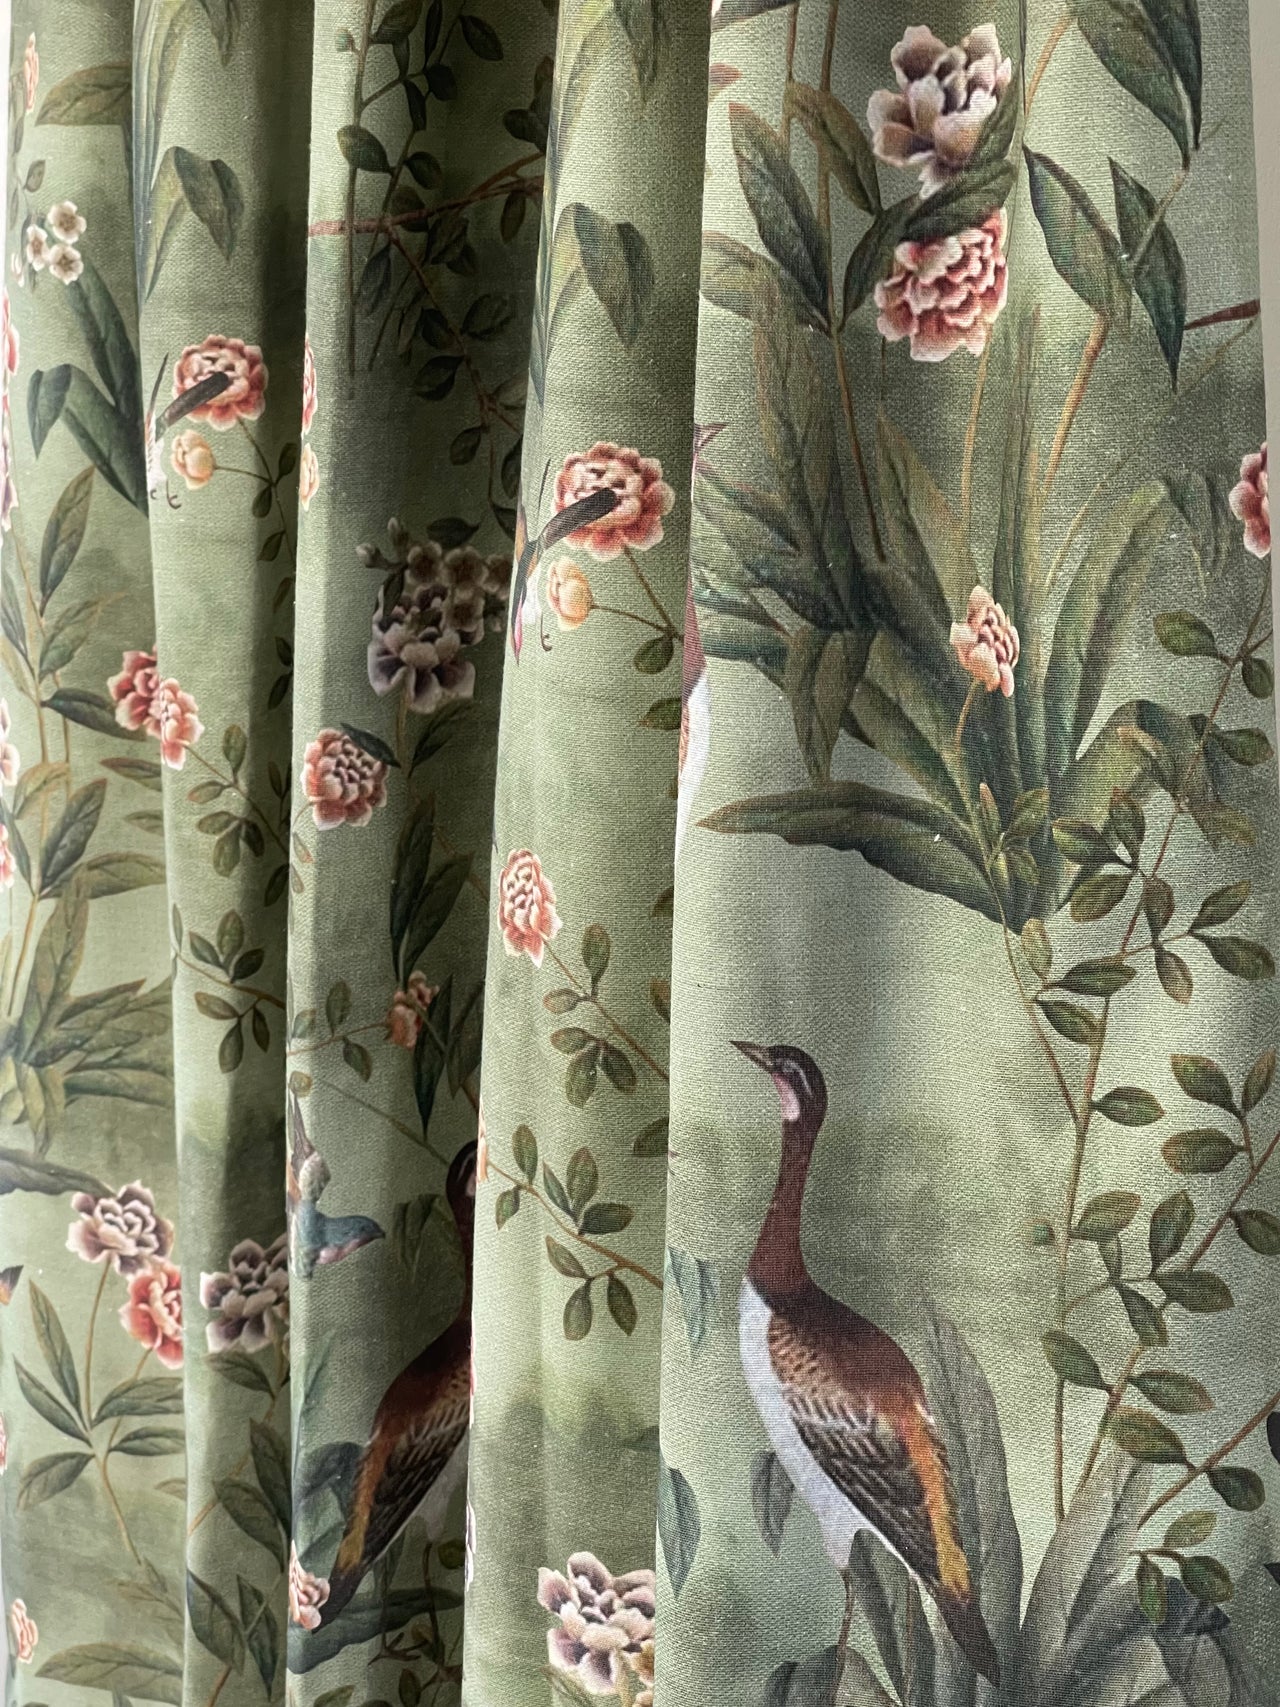 Vintage-Style Goose Botanical Cotton Pair of Curtains - Custom Made to Measure